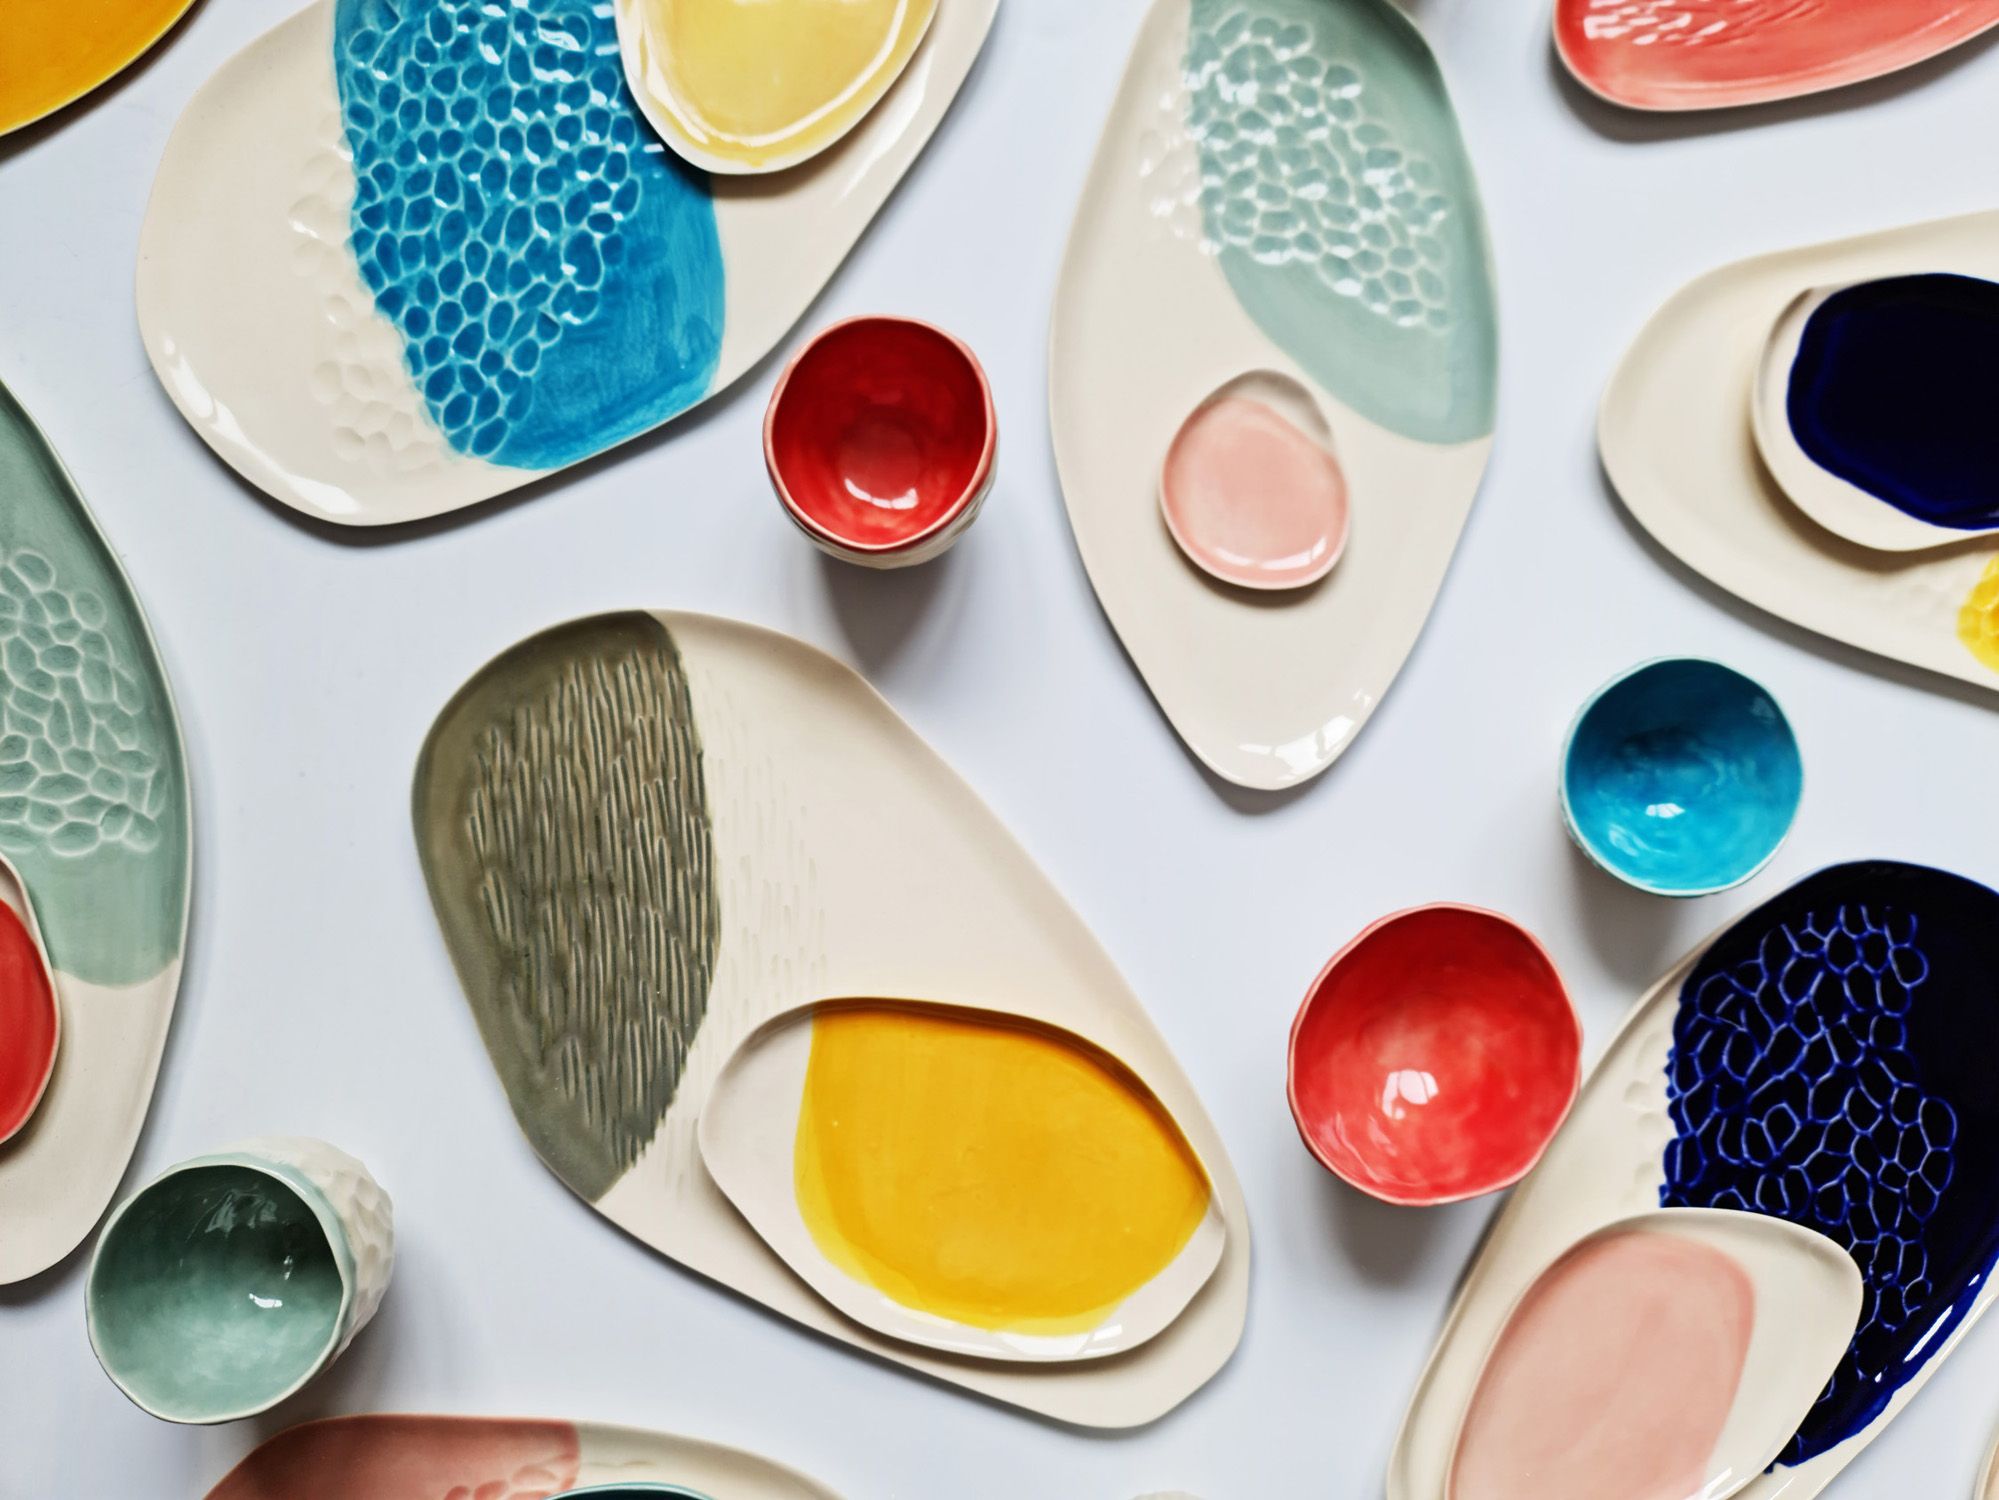 Ceramics from the East: functional or experimental? | TOP 5